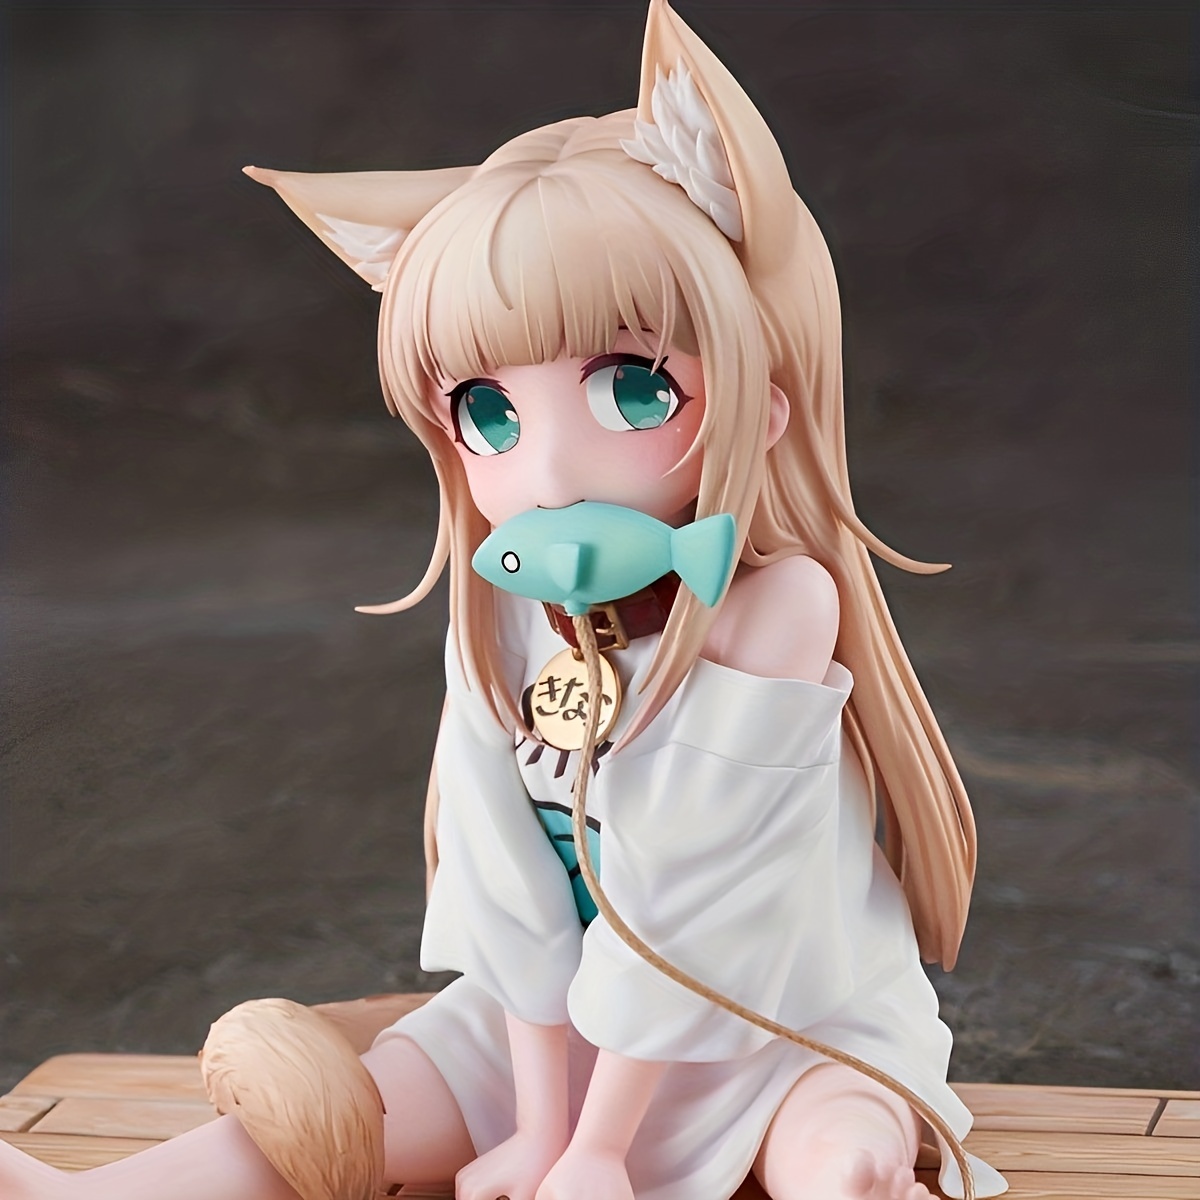 Wholesale 22cm Anime Life in the world starting from zero Figure Cat ear  Rem PVC Action Figure Collectible model toys kid gift From m.alibaba.com